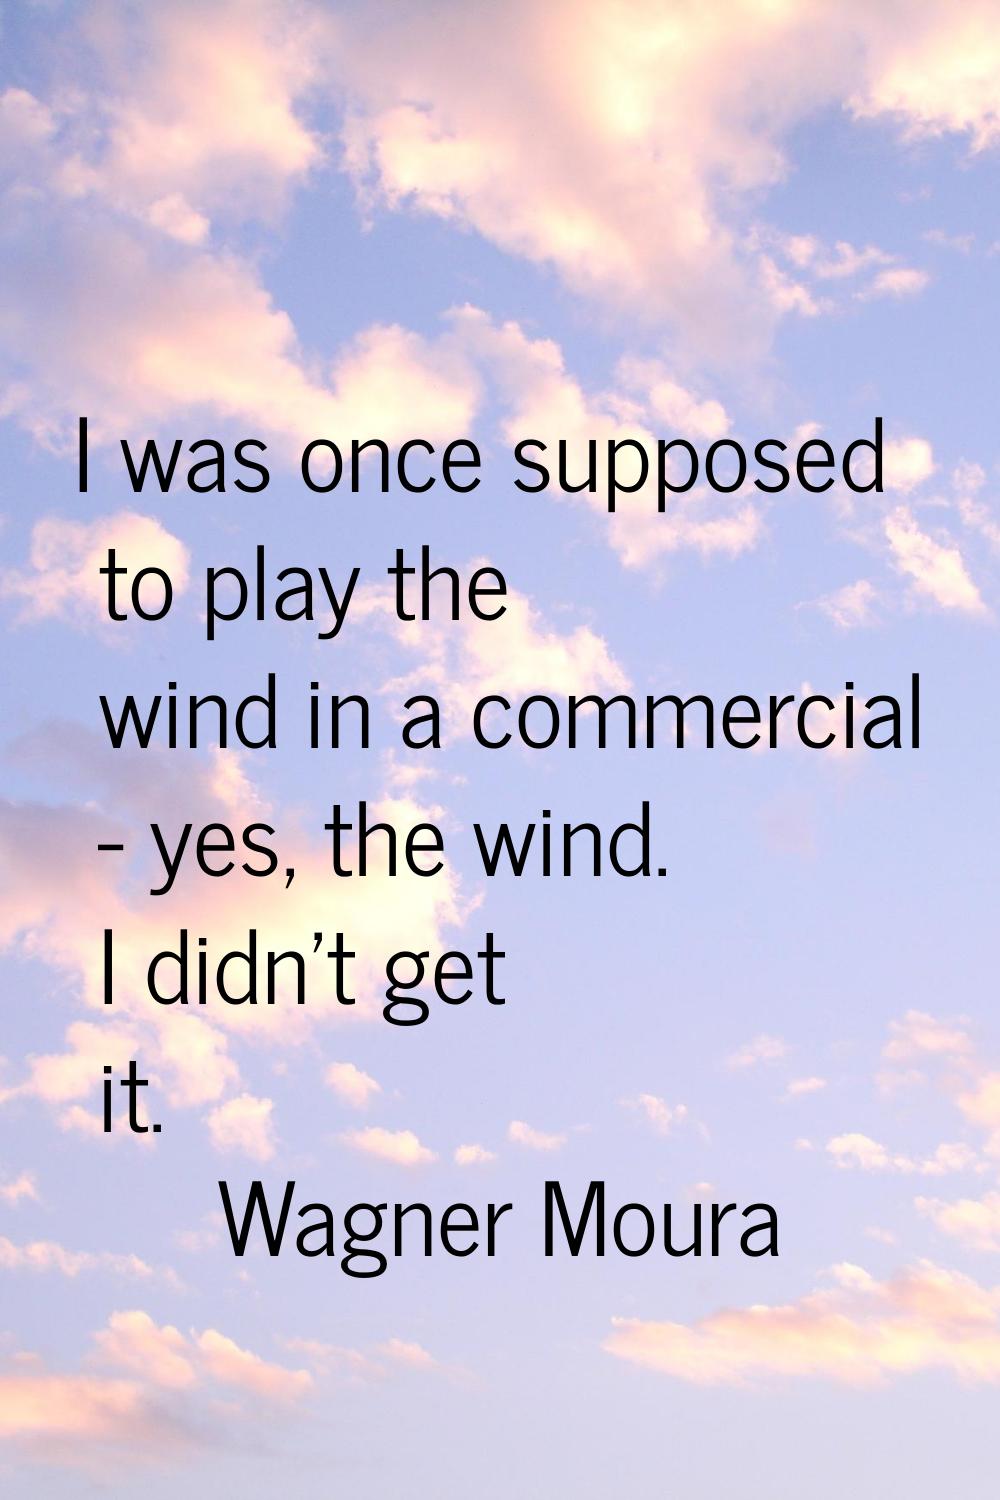 I was once supposed to play the wind in a commercial - yes, the wind. I didn't get it.